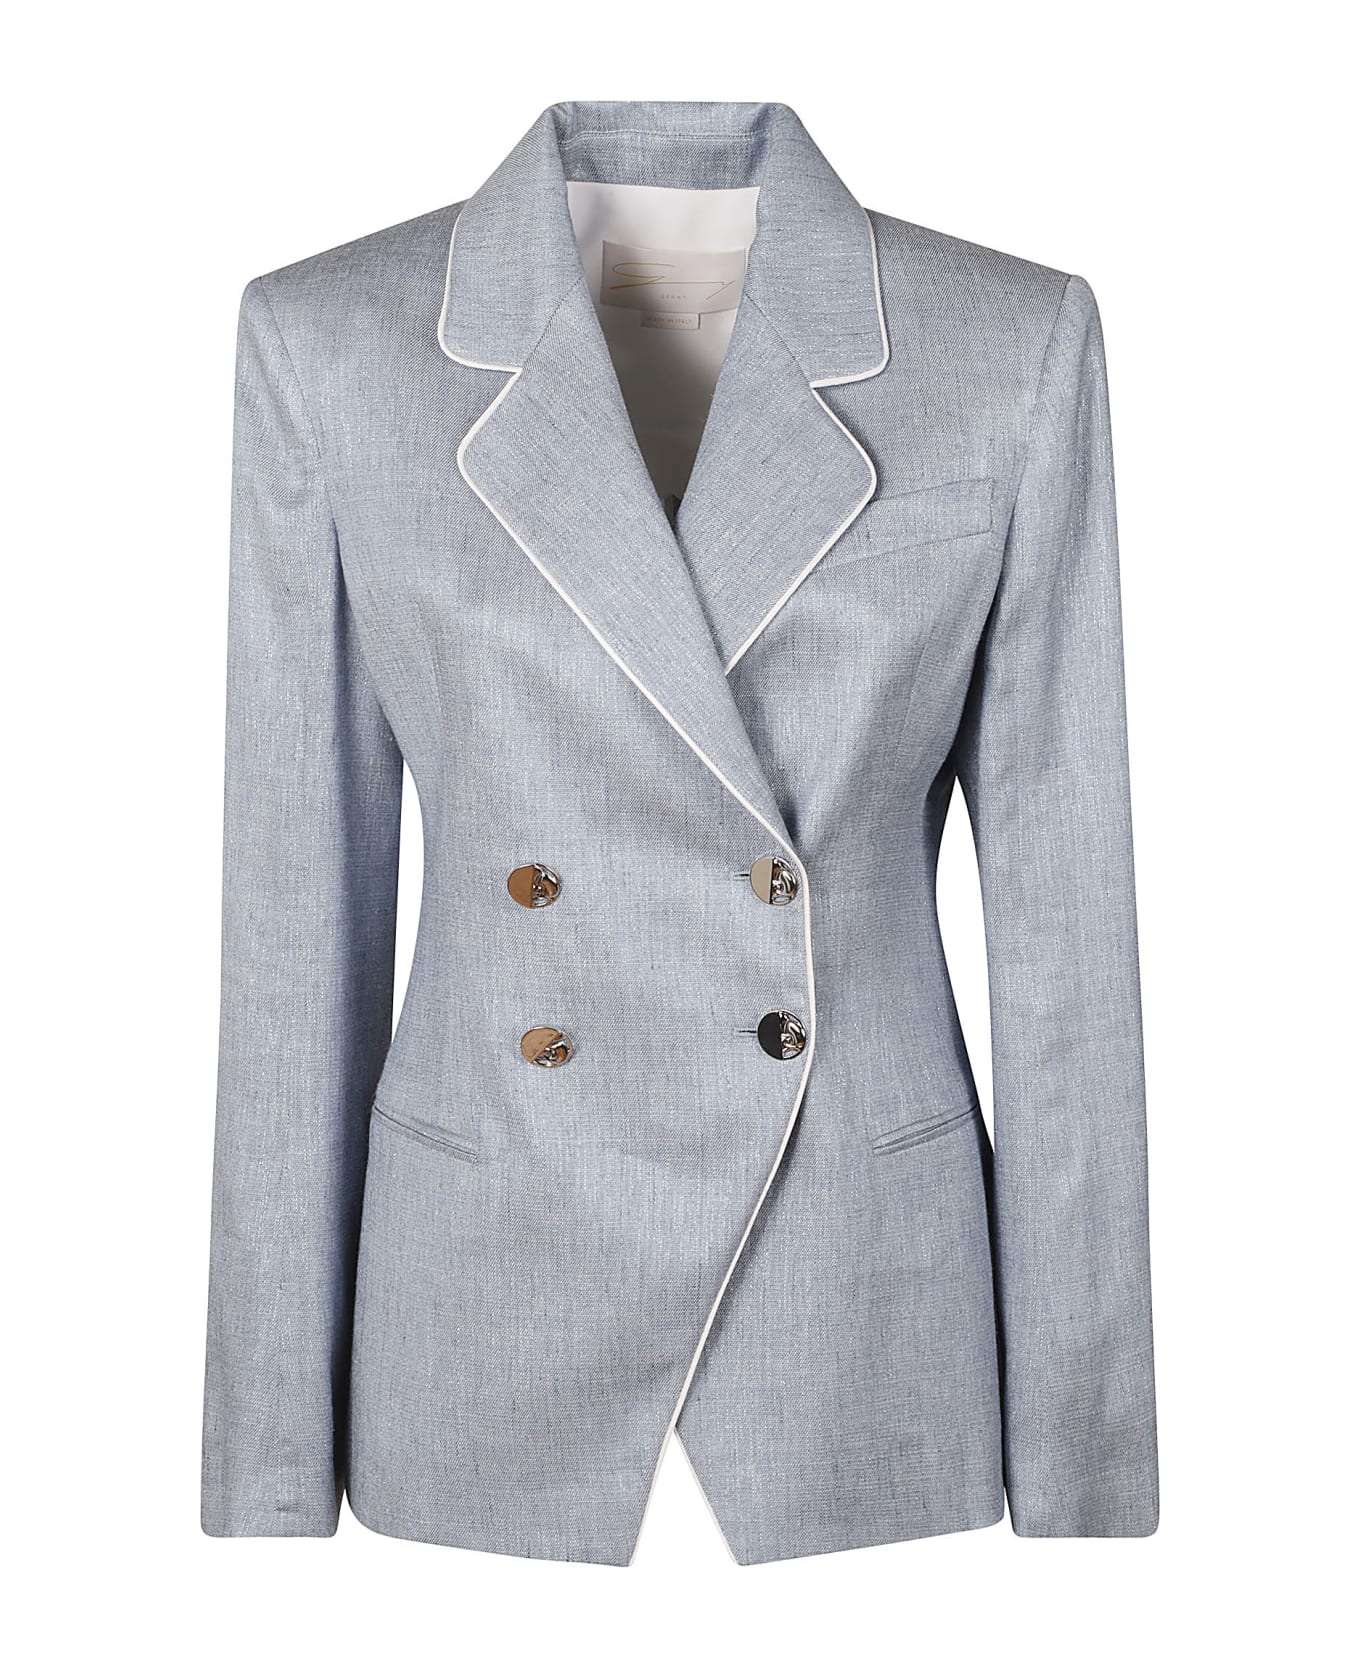 Genny Jacquard Double-breasted Dinner Jacket - Blue